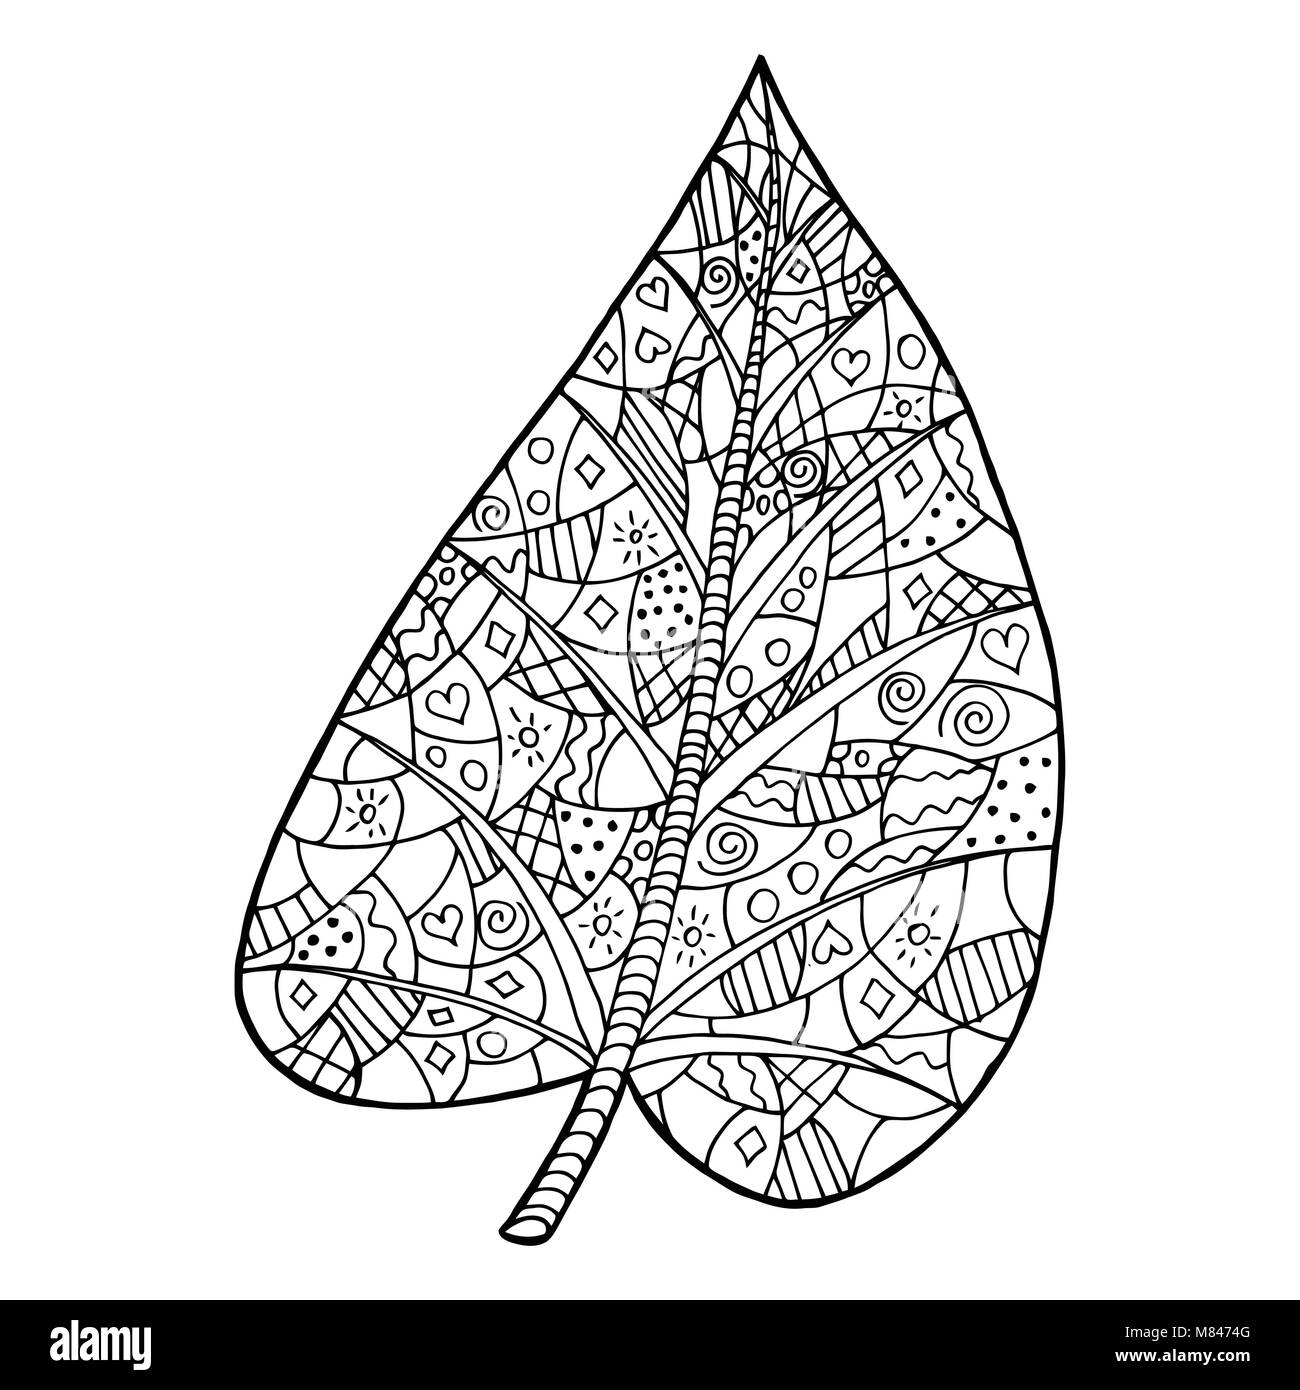 Leaf vector illustration. Tangle patern. Black and white coloring book ...